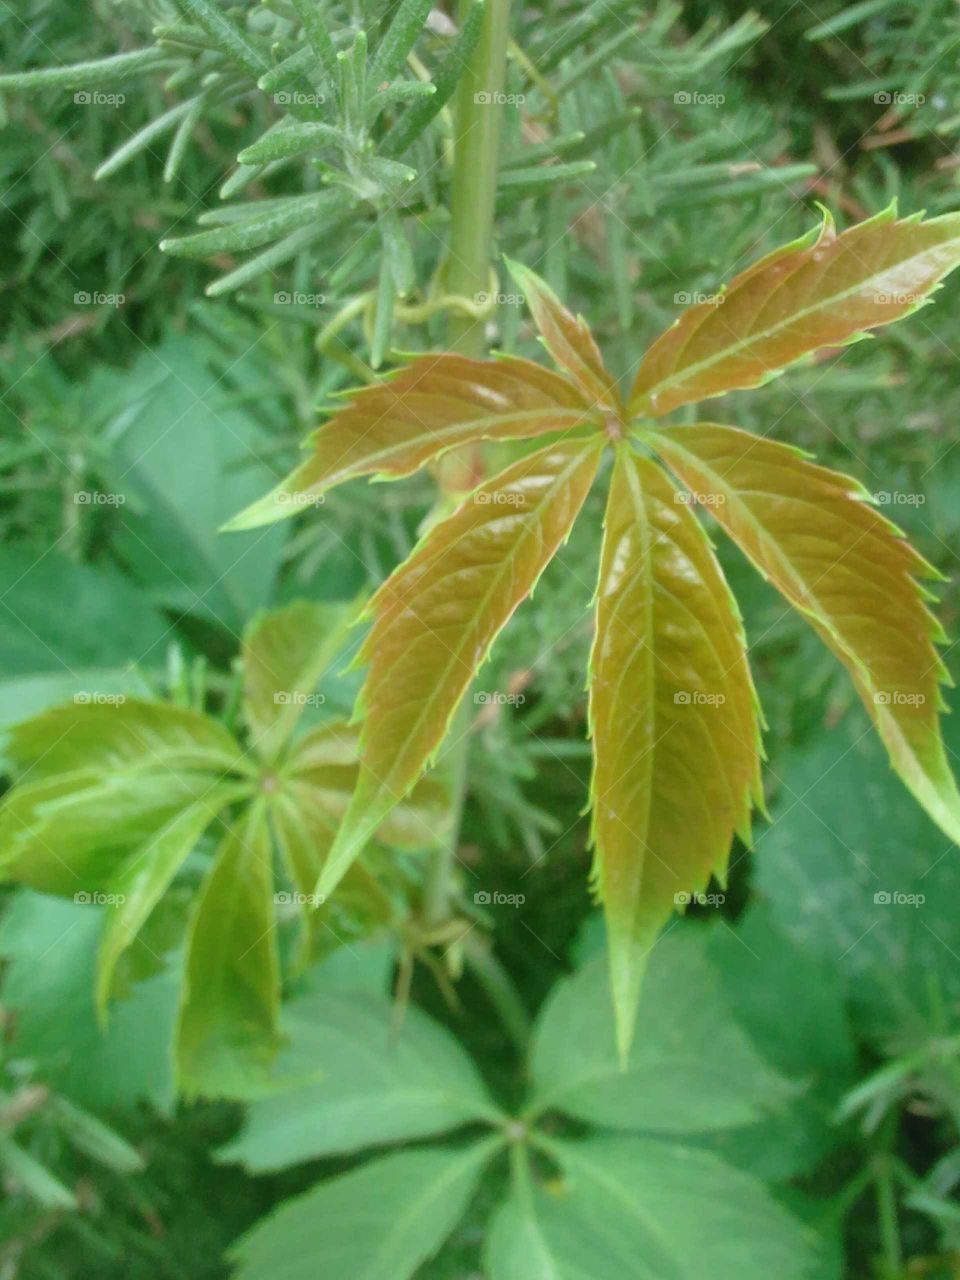 Beautiful nature in a weed& not weed lol!